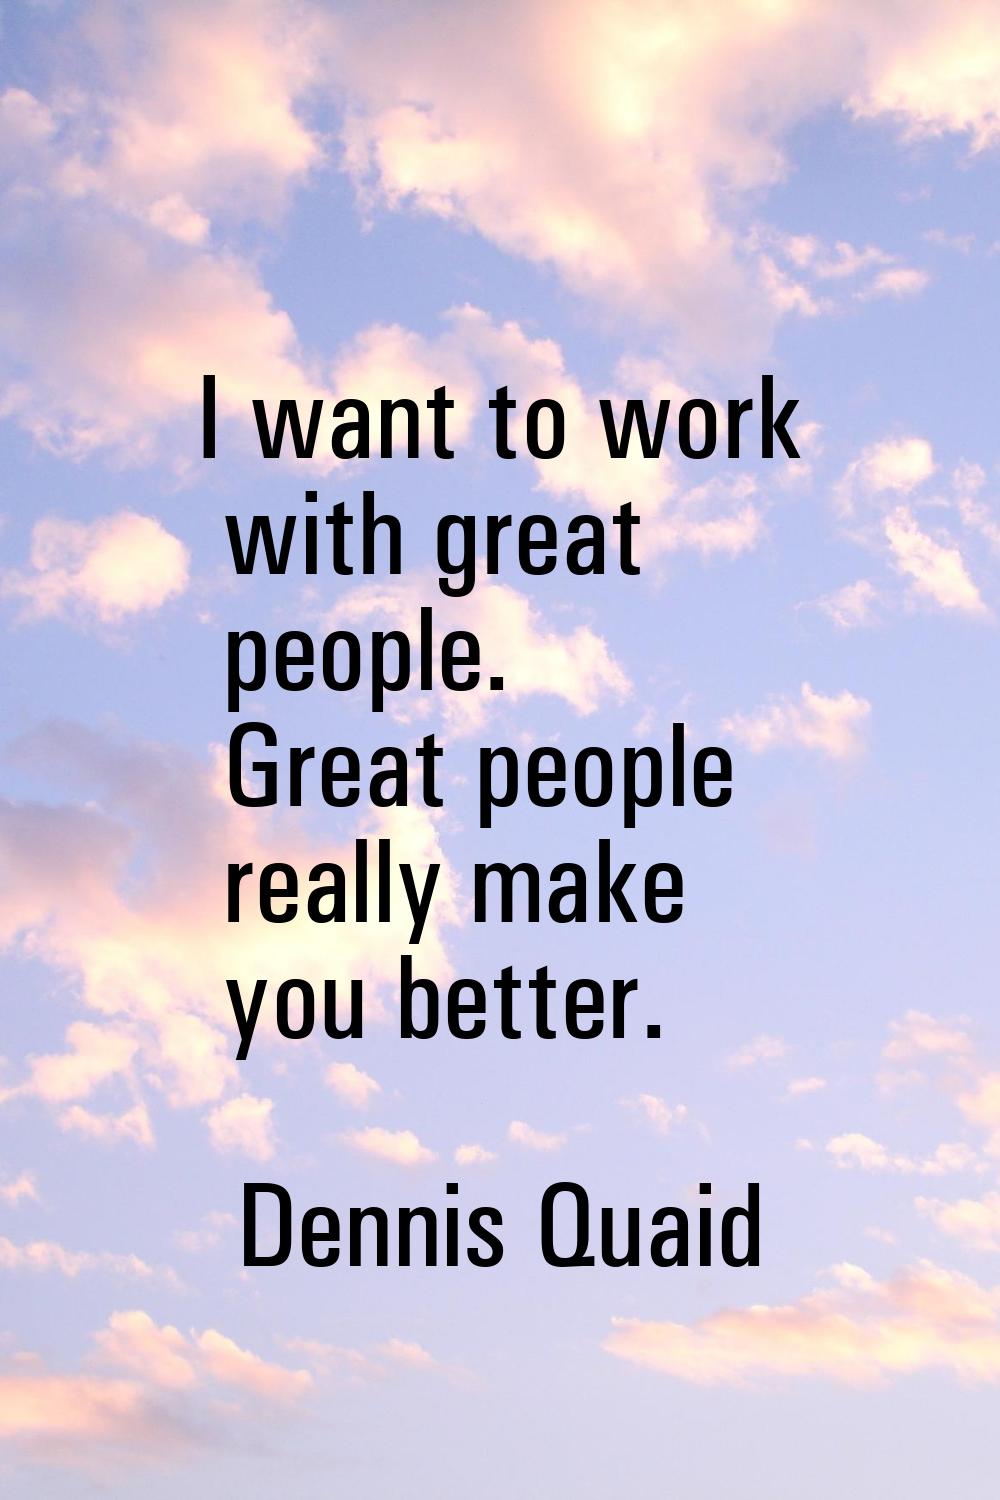 I want to work with great people. Great people really make you better.